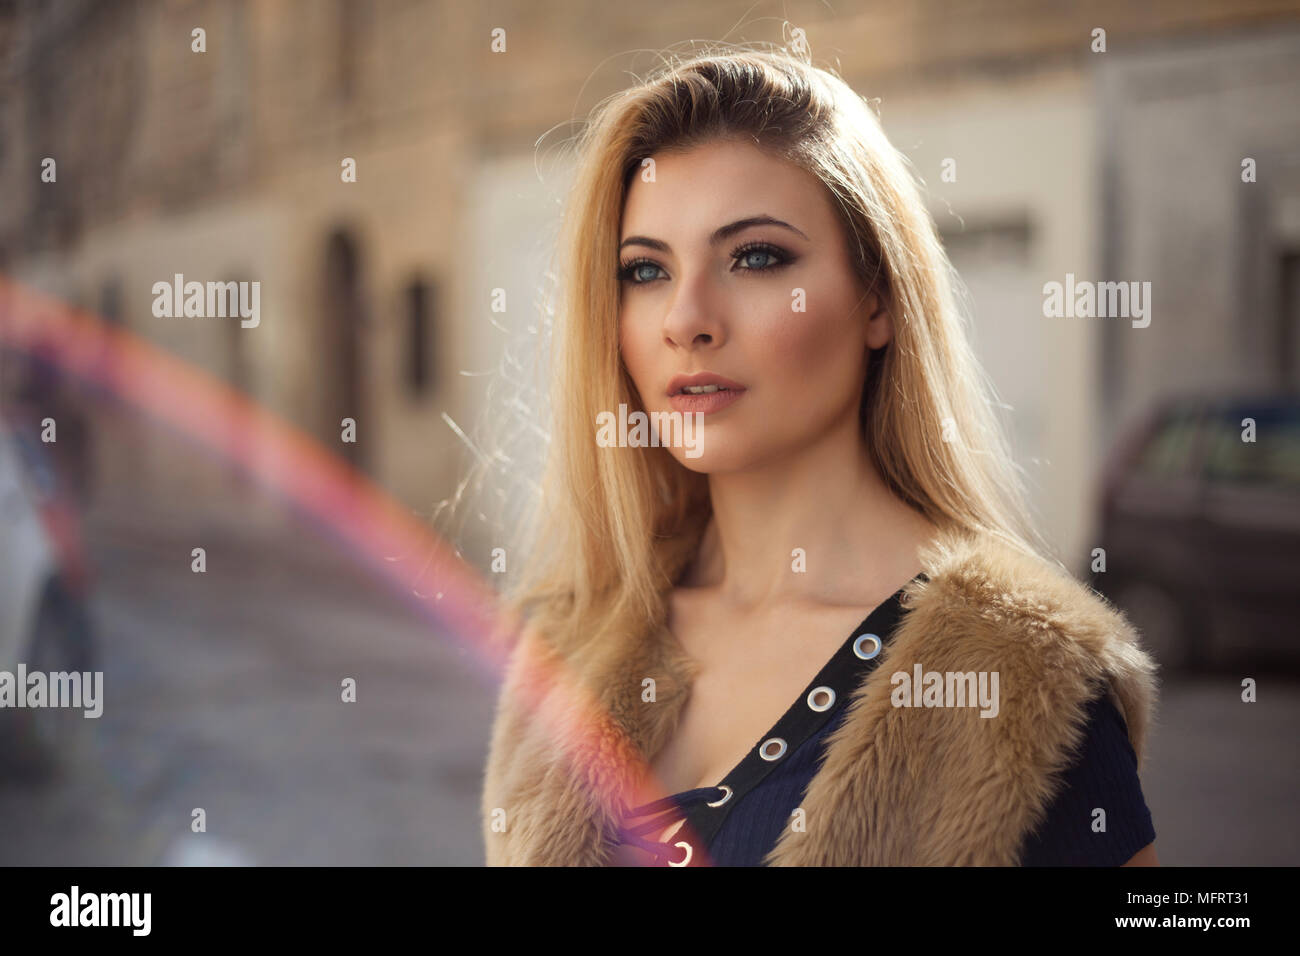 Blue eye model with blond hair with street in the background Stock Photo